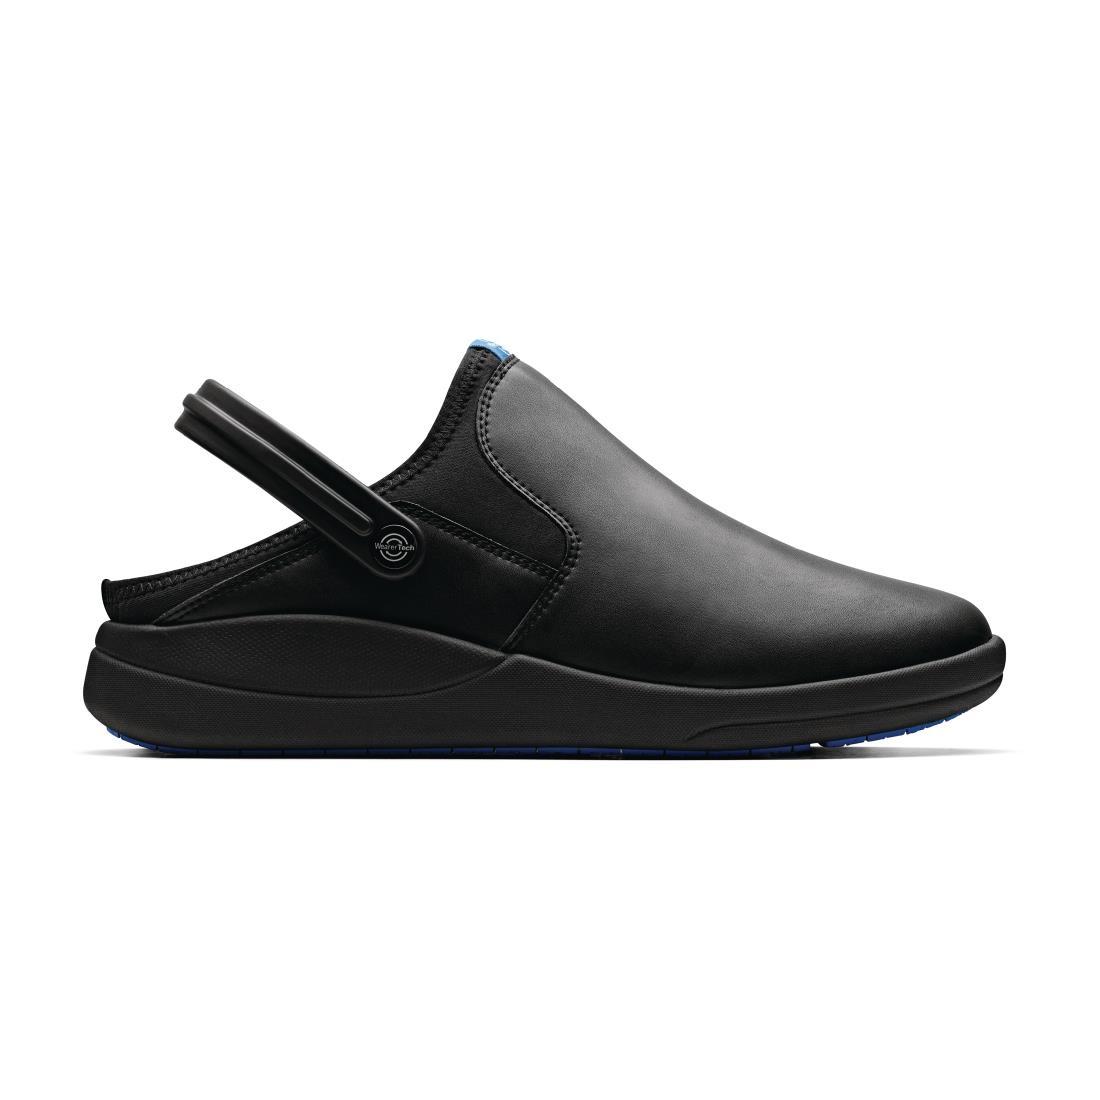 WearerTech Refresh Clog Black with Firm Insoles Size 47 - BB556-12  - 3